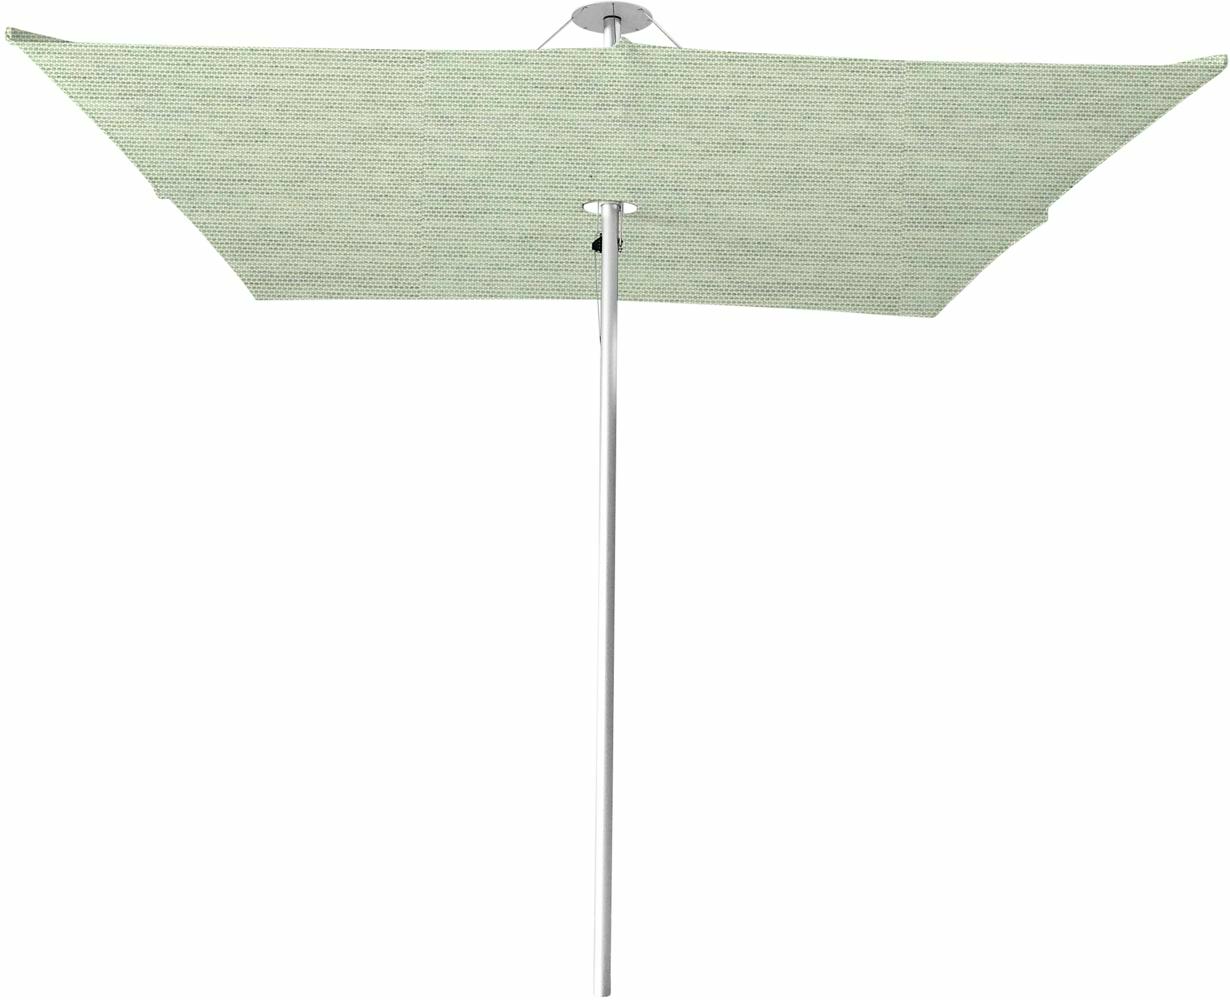 Infina center post umbrella, 3 m square, with frame in Aluminum and Solidum Mint canopy. 